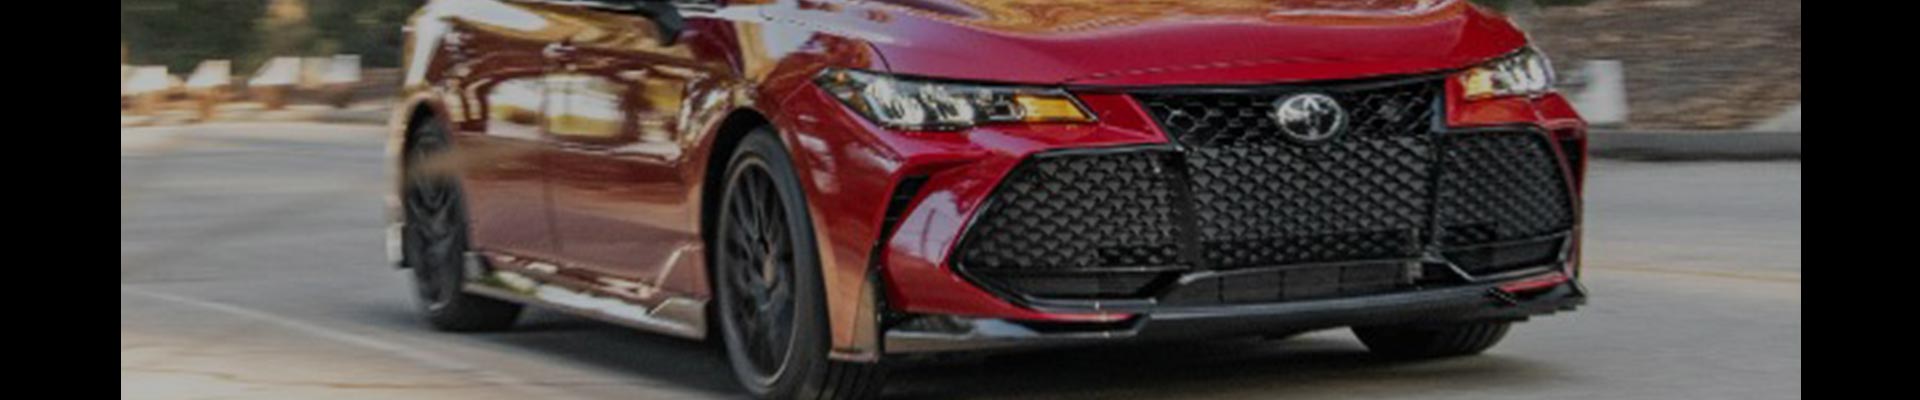 Shop Replacement and OEM Toyota Avalon Parts with Discounted Price on the Net